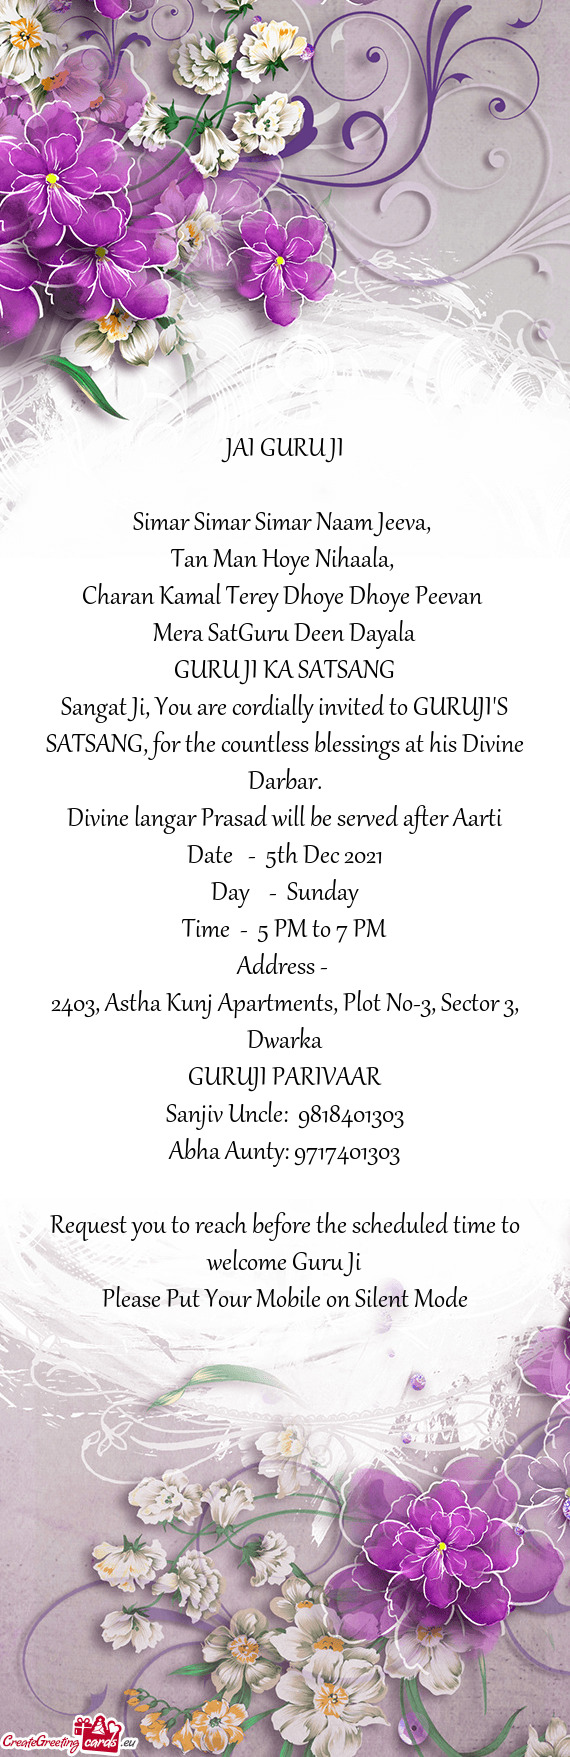 Sangat Ji, You are cordially invited to GURUJI'S SATSANG, for the countless blessings at his Divine